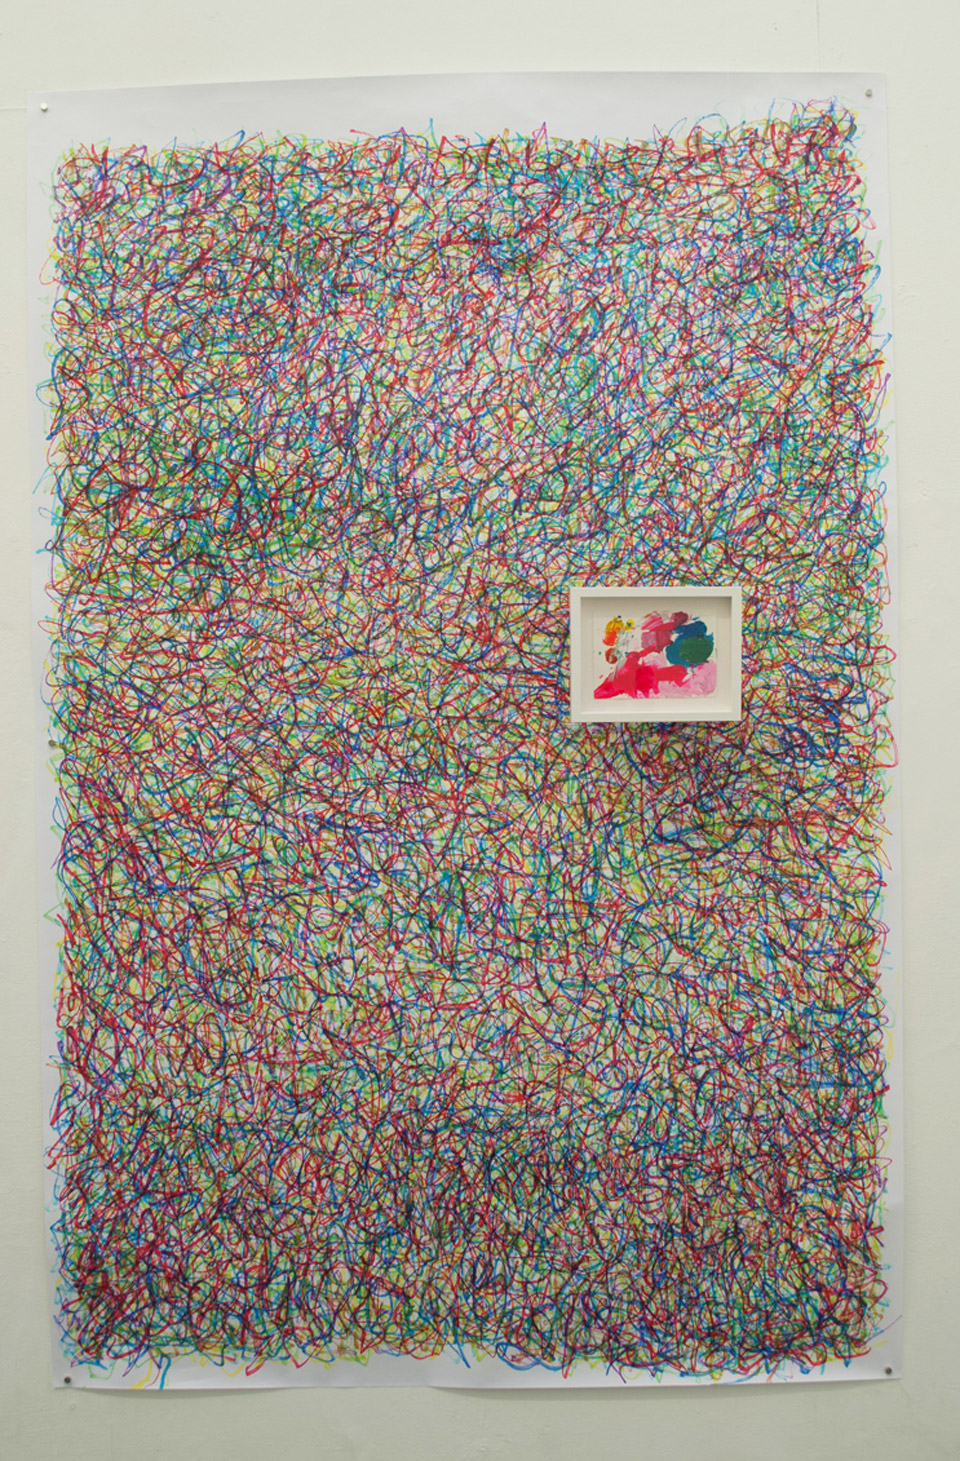 <p>One action, Permanent markers, May 2012, acrylic, wood and glass on paper</p>